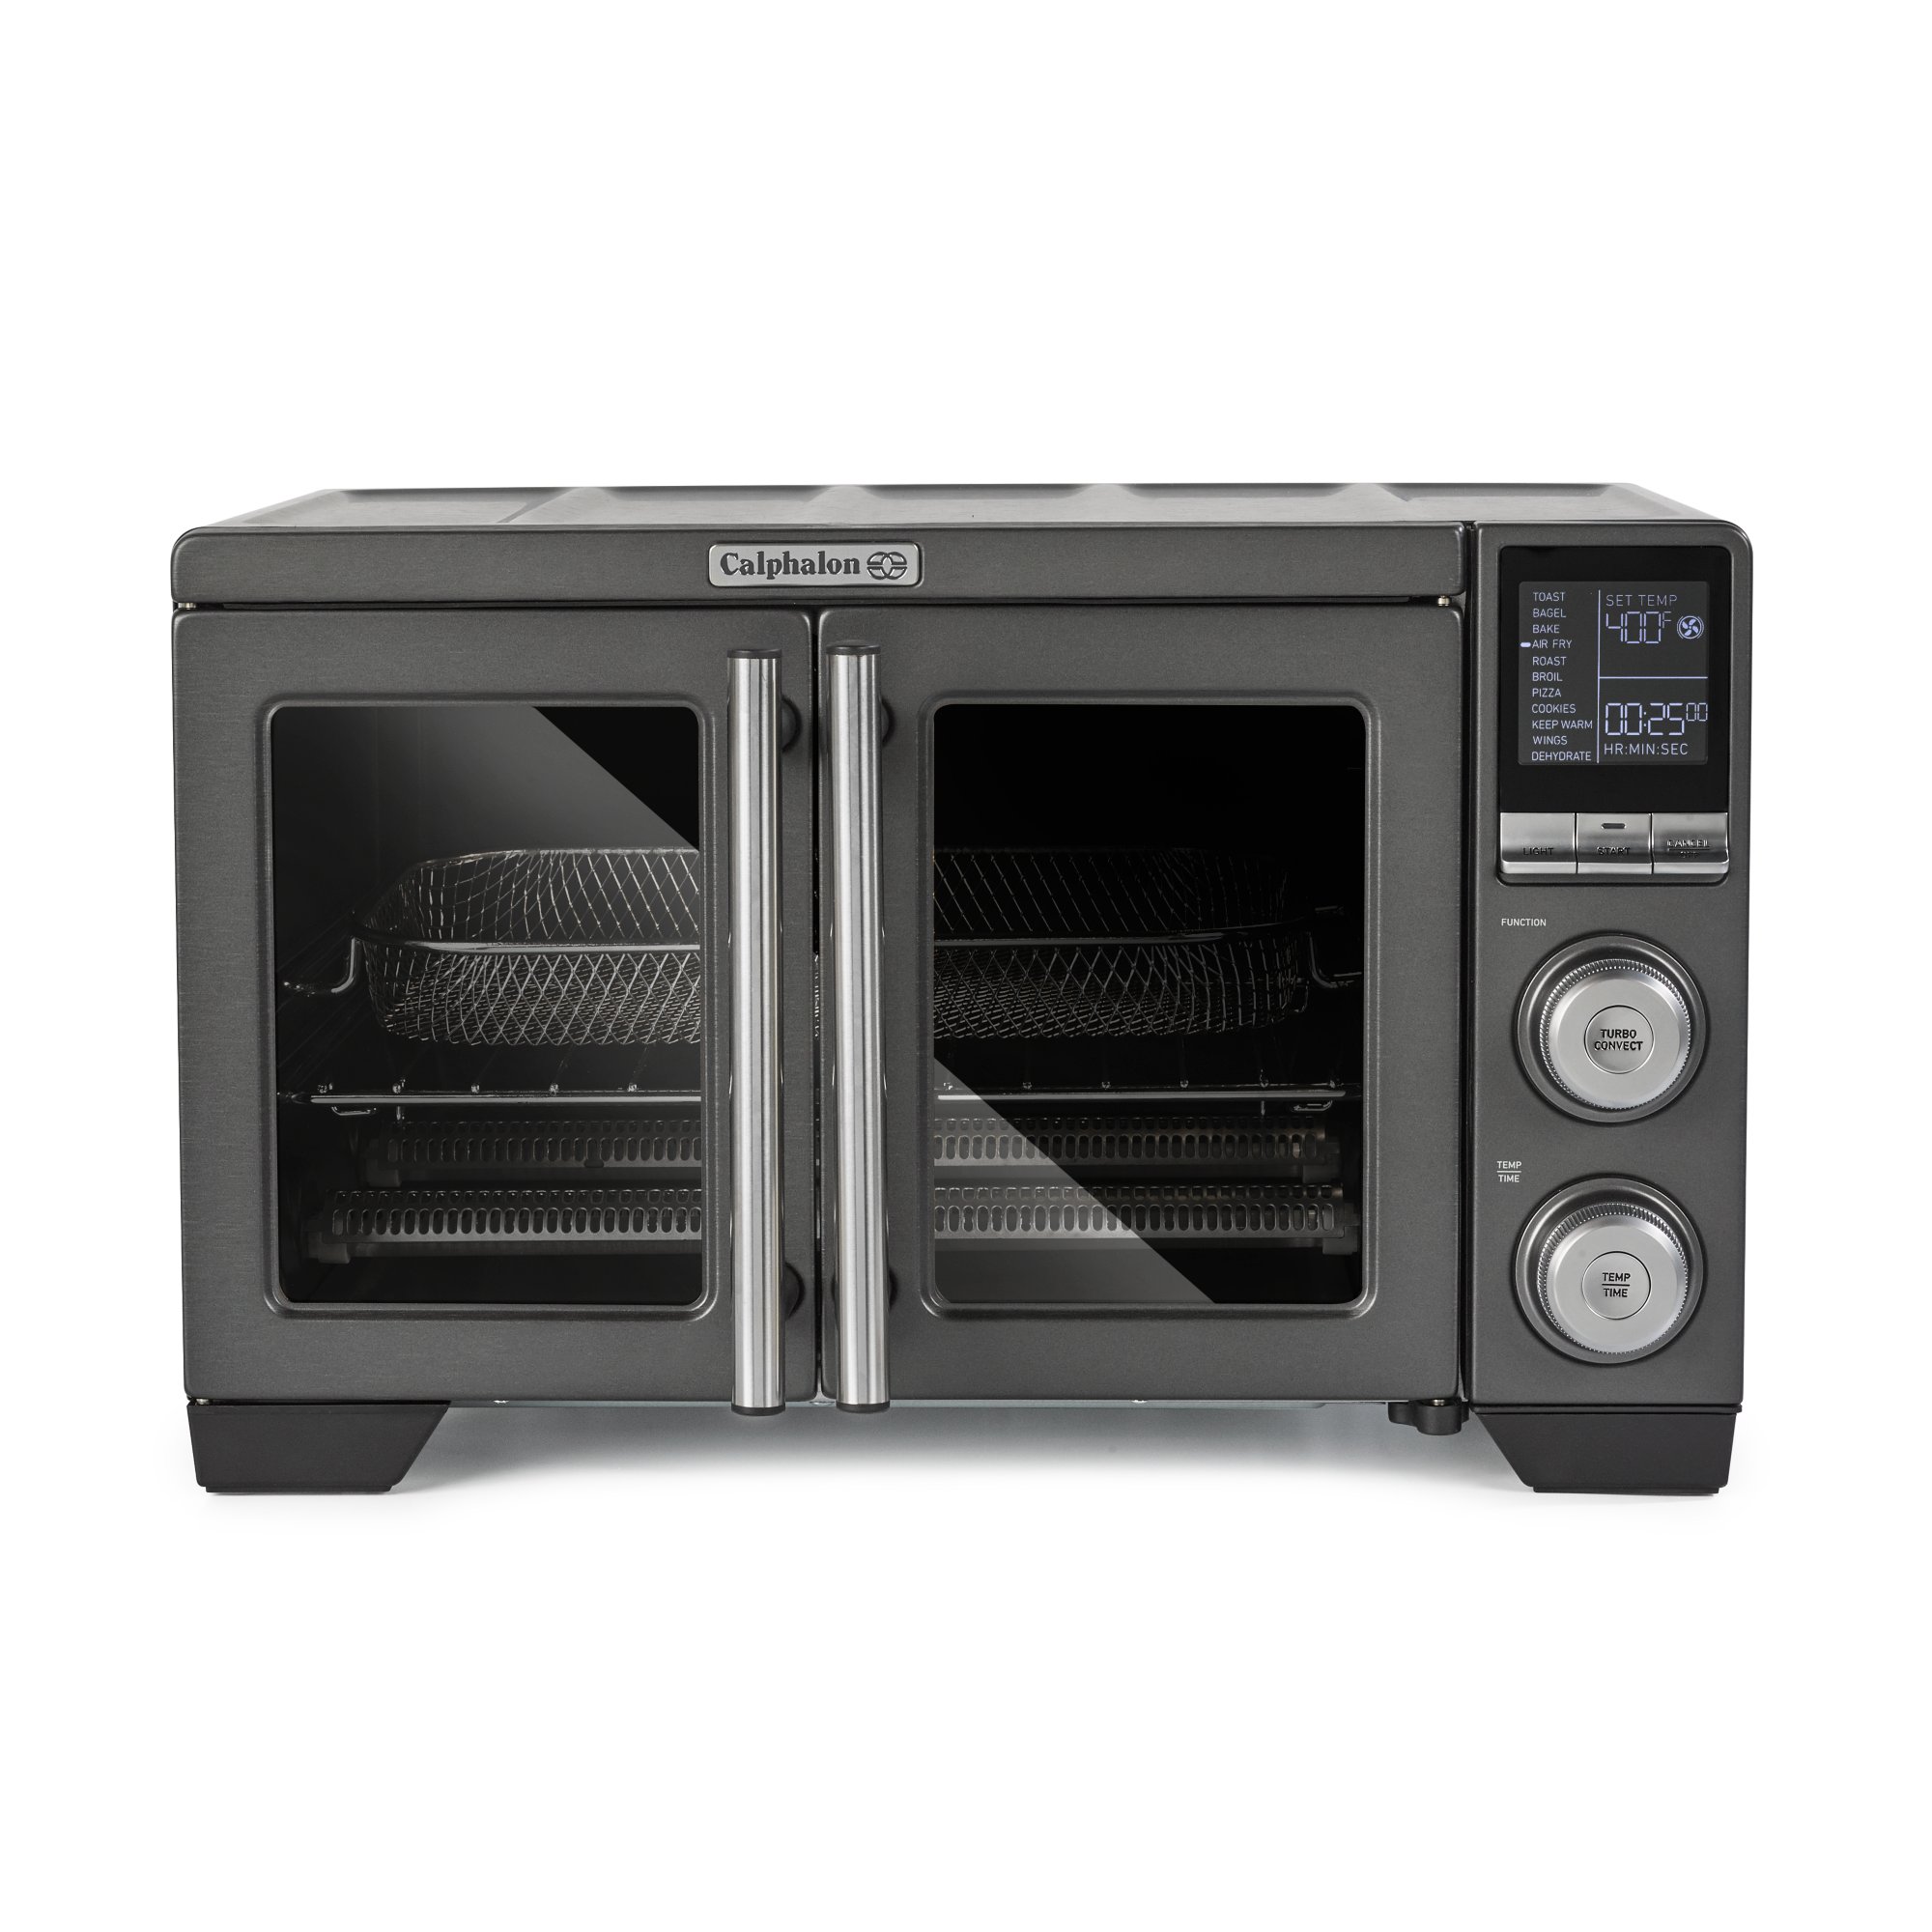 Performance Air Fry Convection Oven, Countertop Toaster Oven, Dark  Stainless Steel